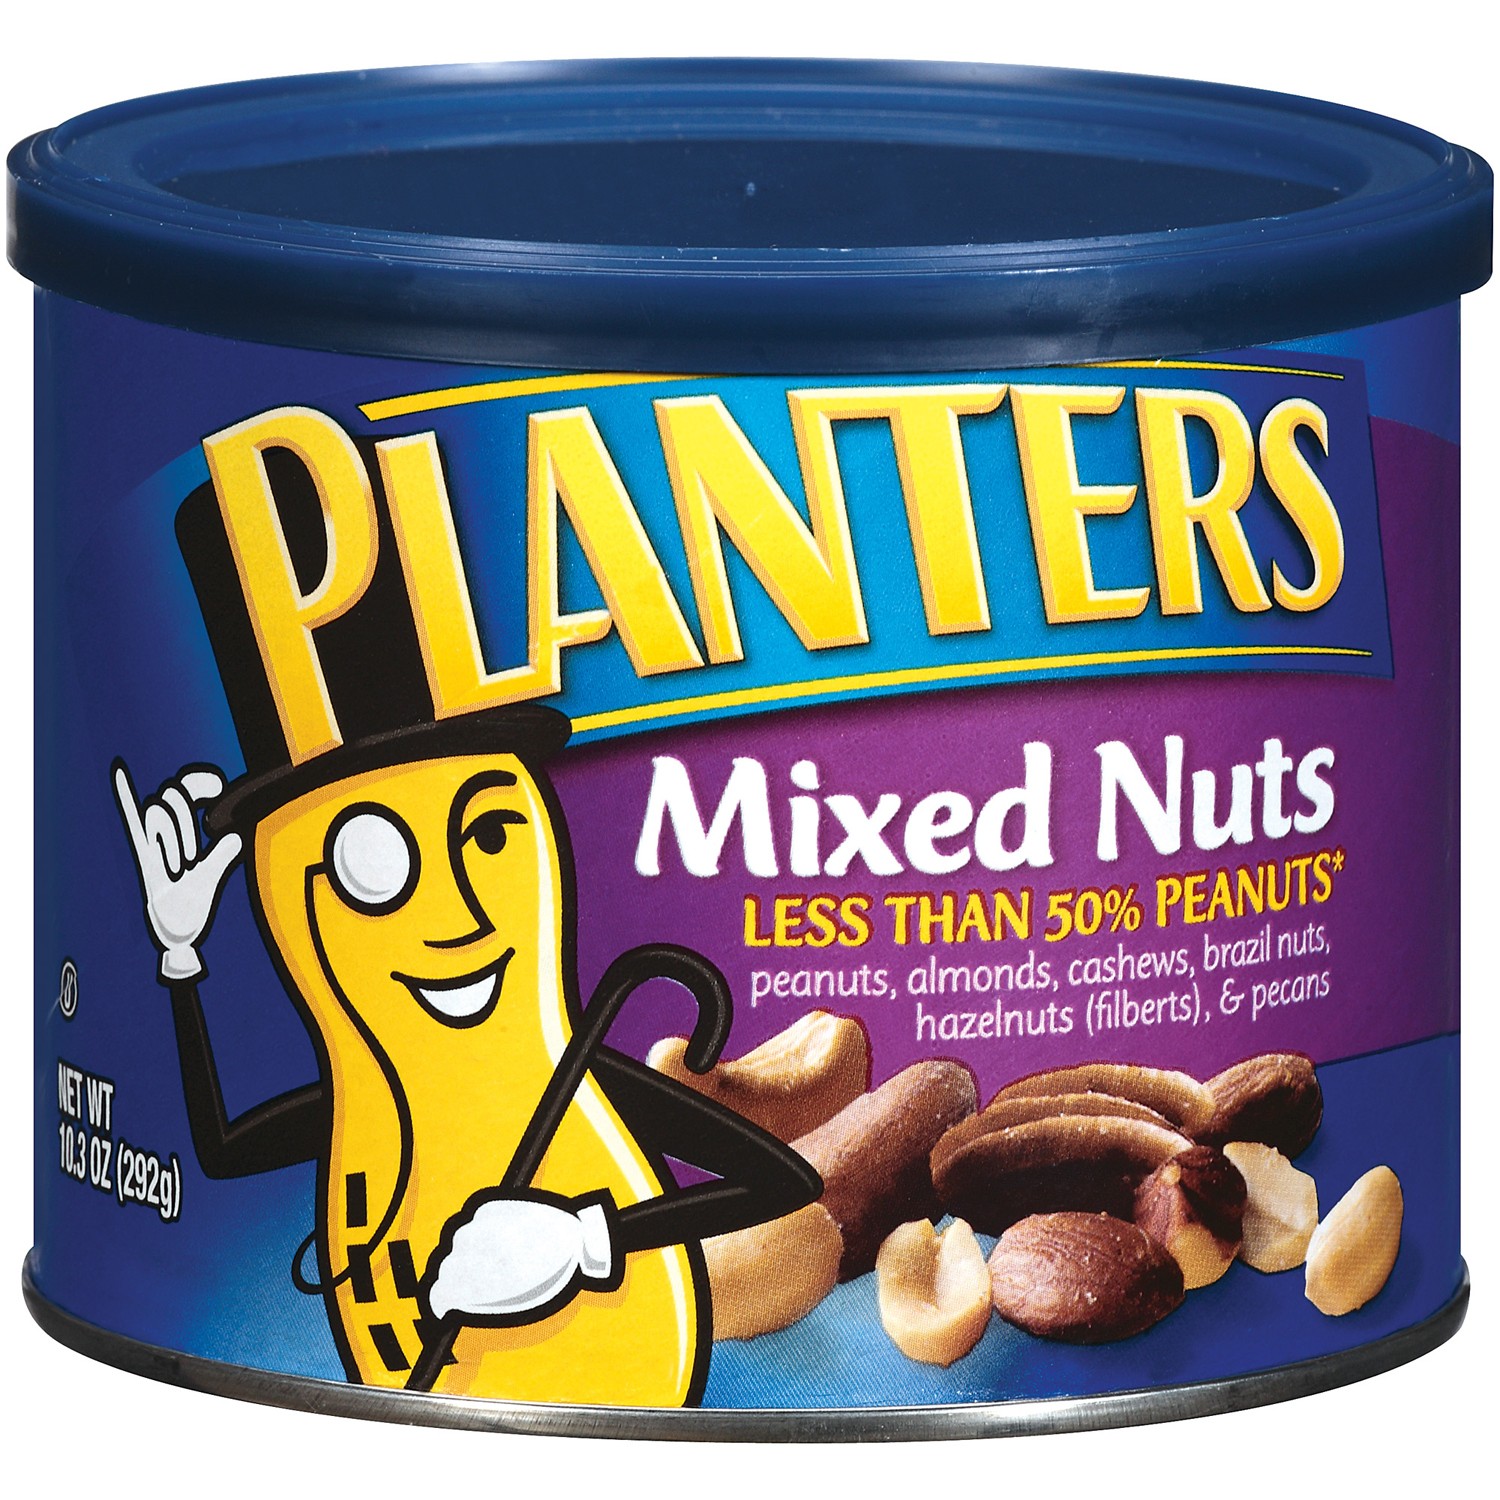 Planters Mixed Nuts Nutrition Facts